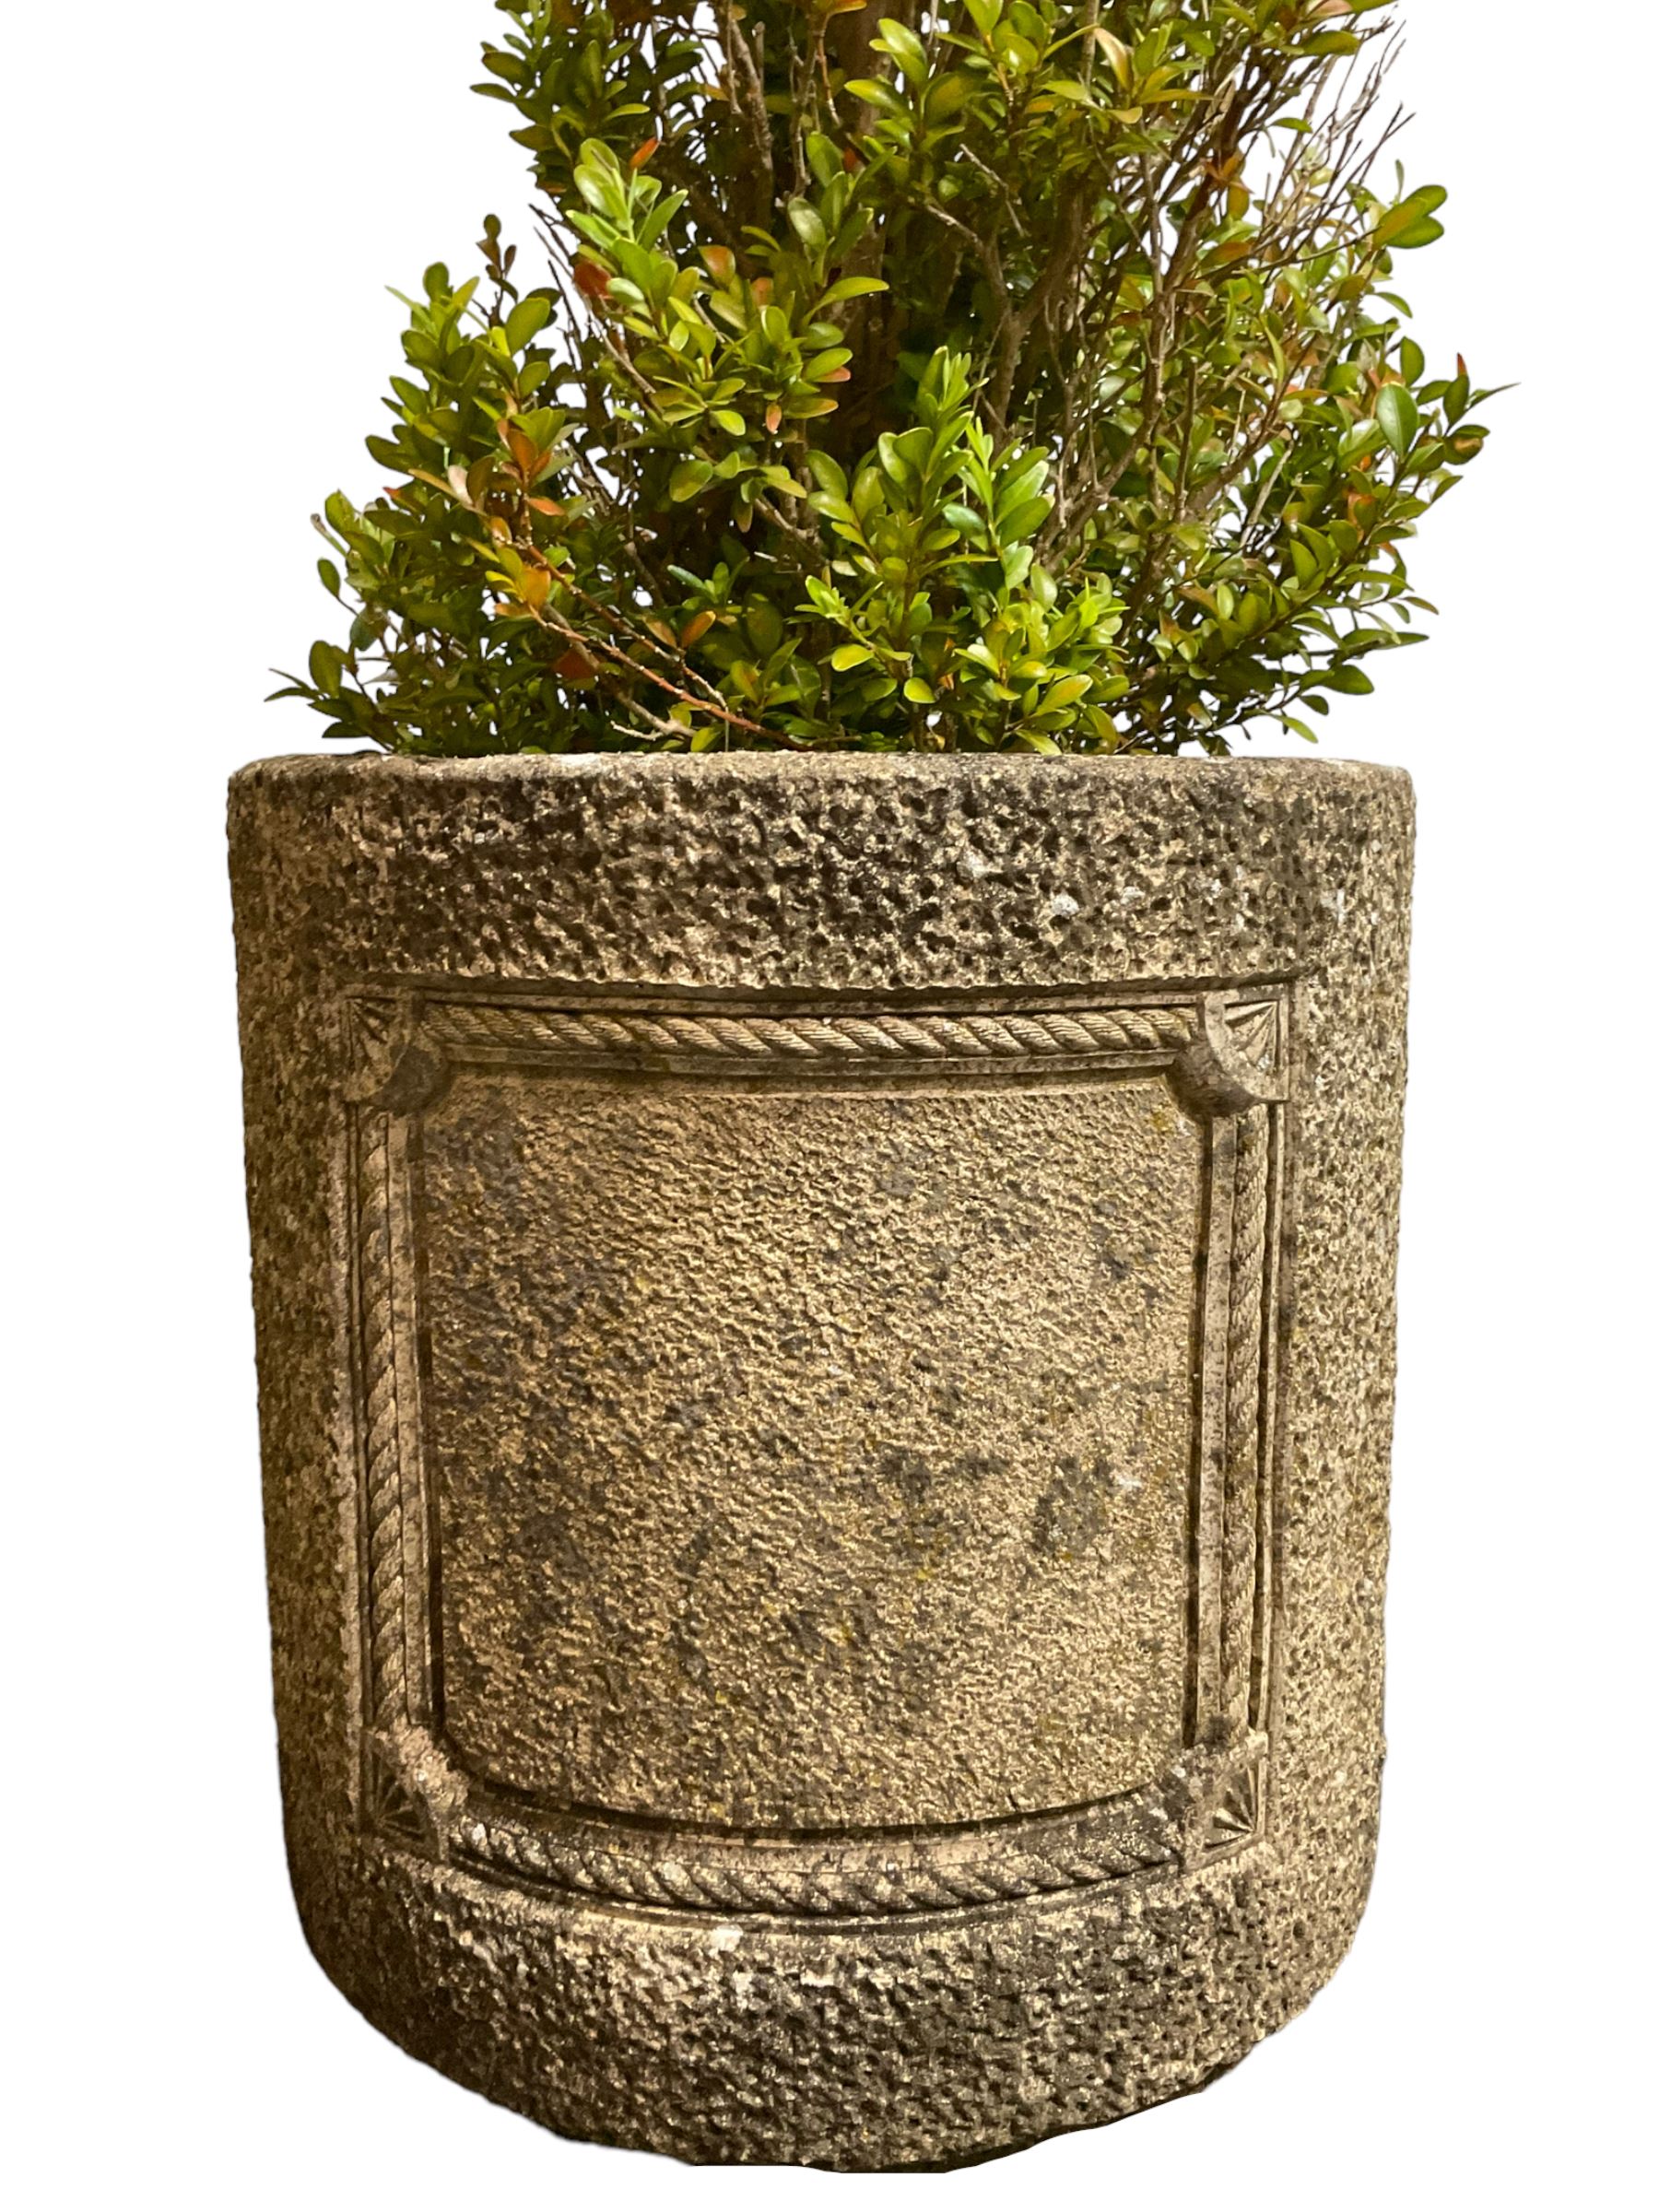 Pair of cast stone cylindrical planters - Image 2 of 5